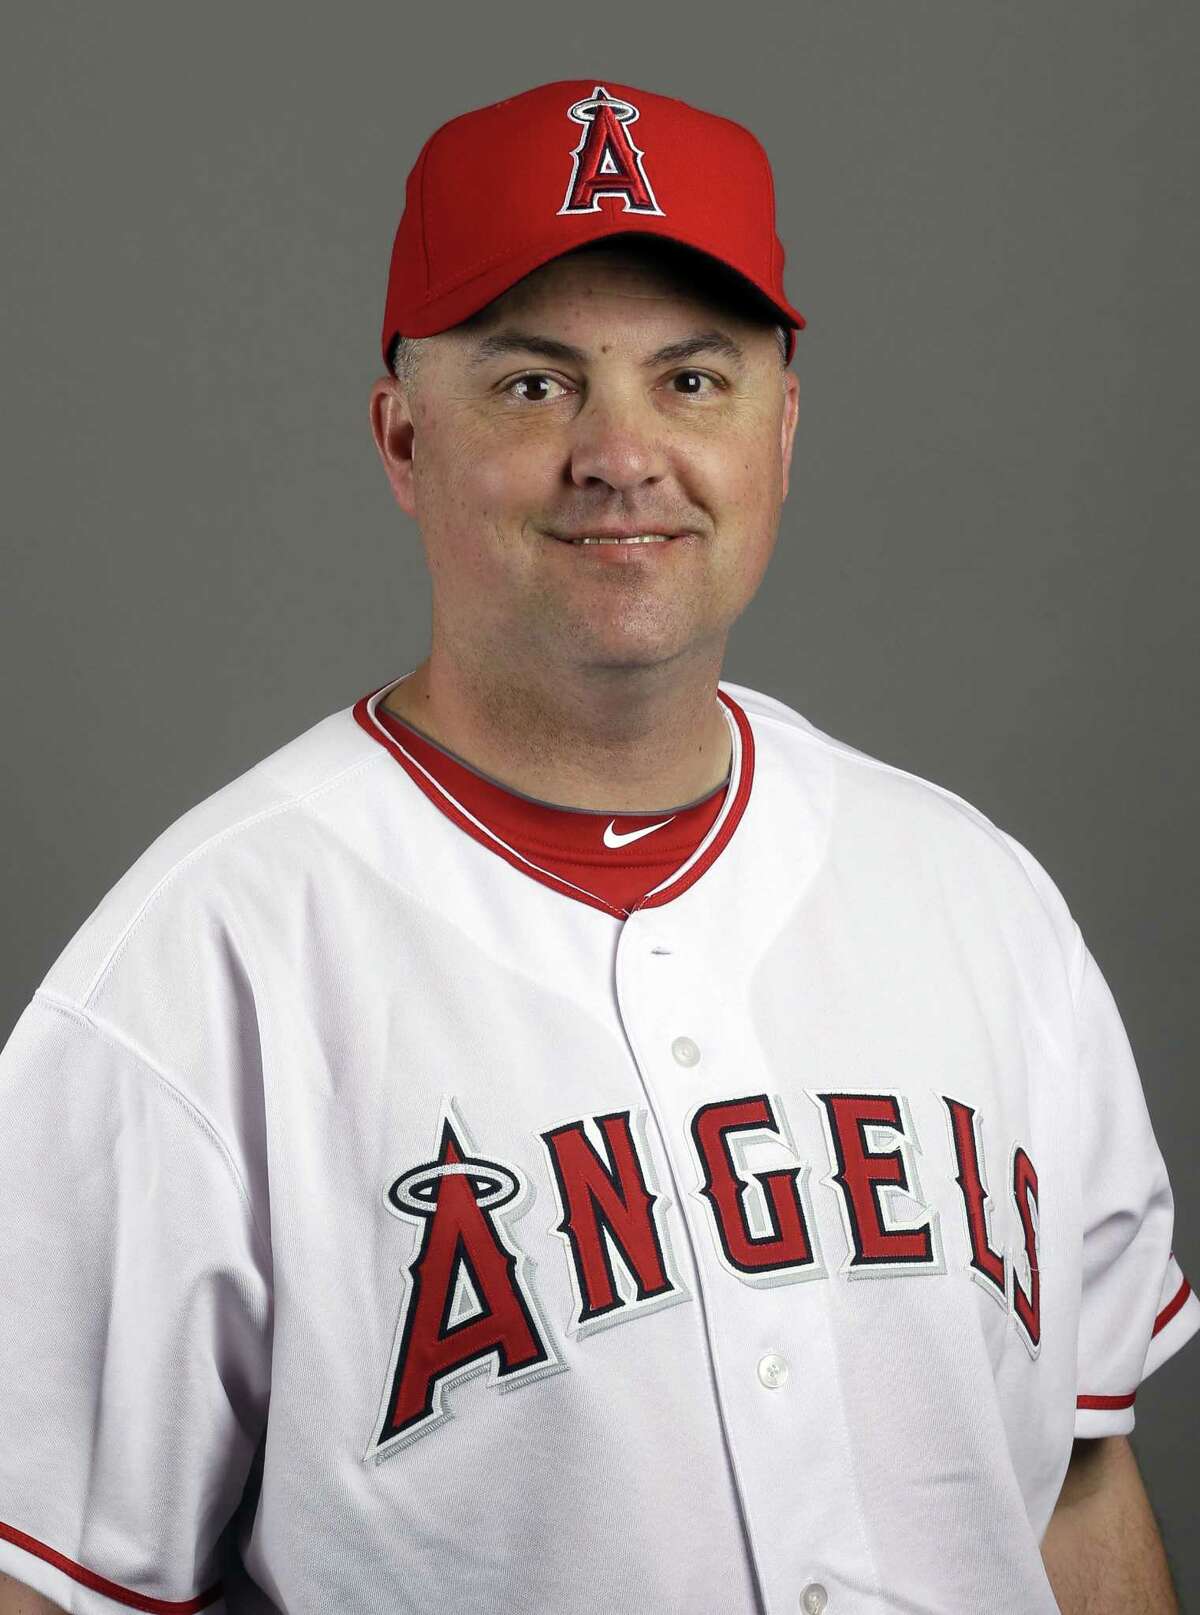 Los Angeles Angels coach Rico Brogna is back with the team following surgery for testicular cancer.